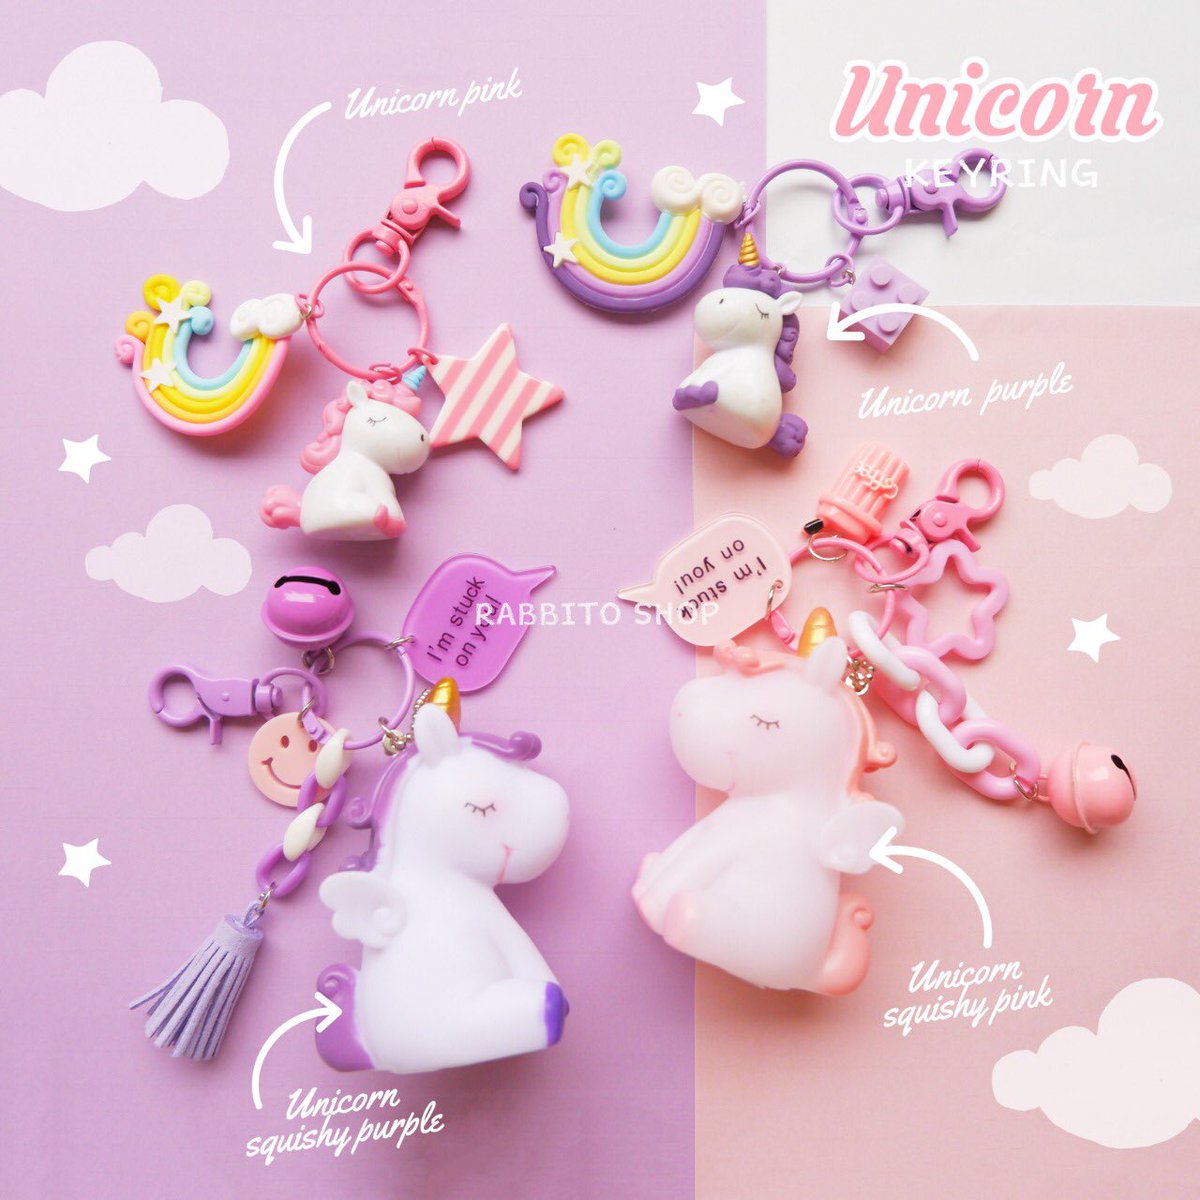 I don’t know if I should try this or not but.. Twitter please do your magicDue to covid19, last week I’ve been told to take unpaid leave until idk when;; so my only source of income now is my online shop. It would help me a lot if you could RT this.I mainly sell keychains